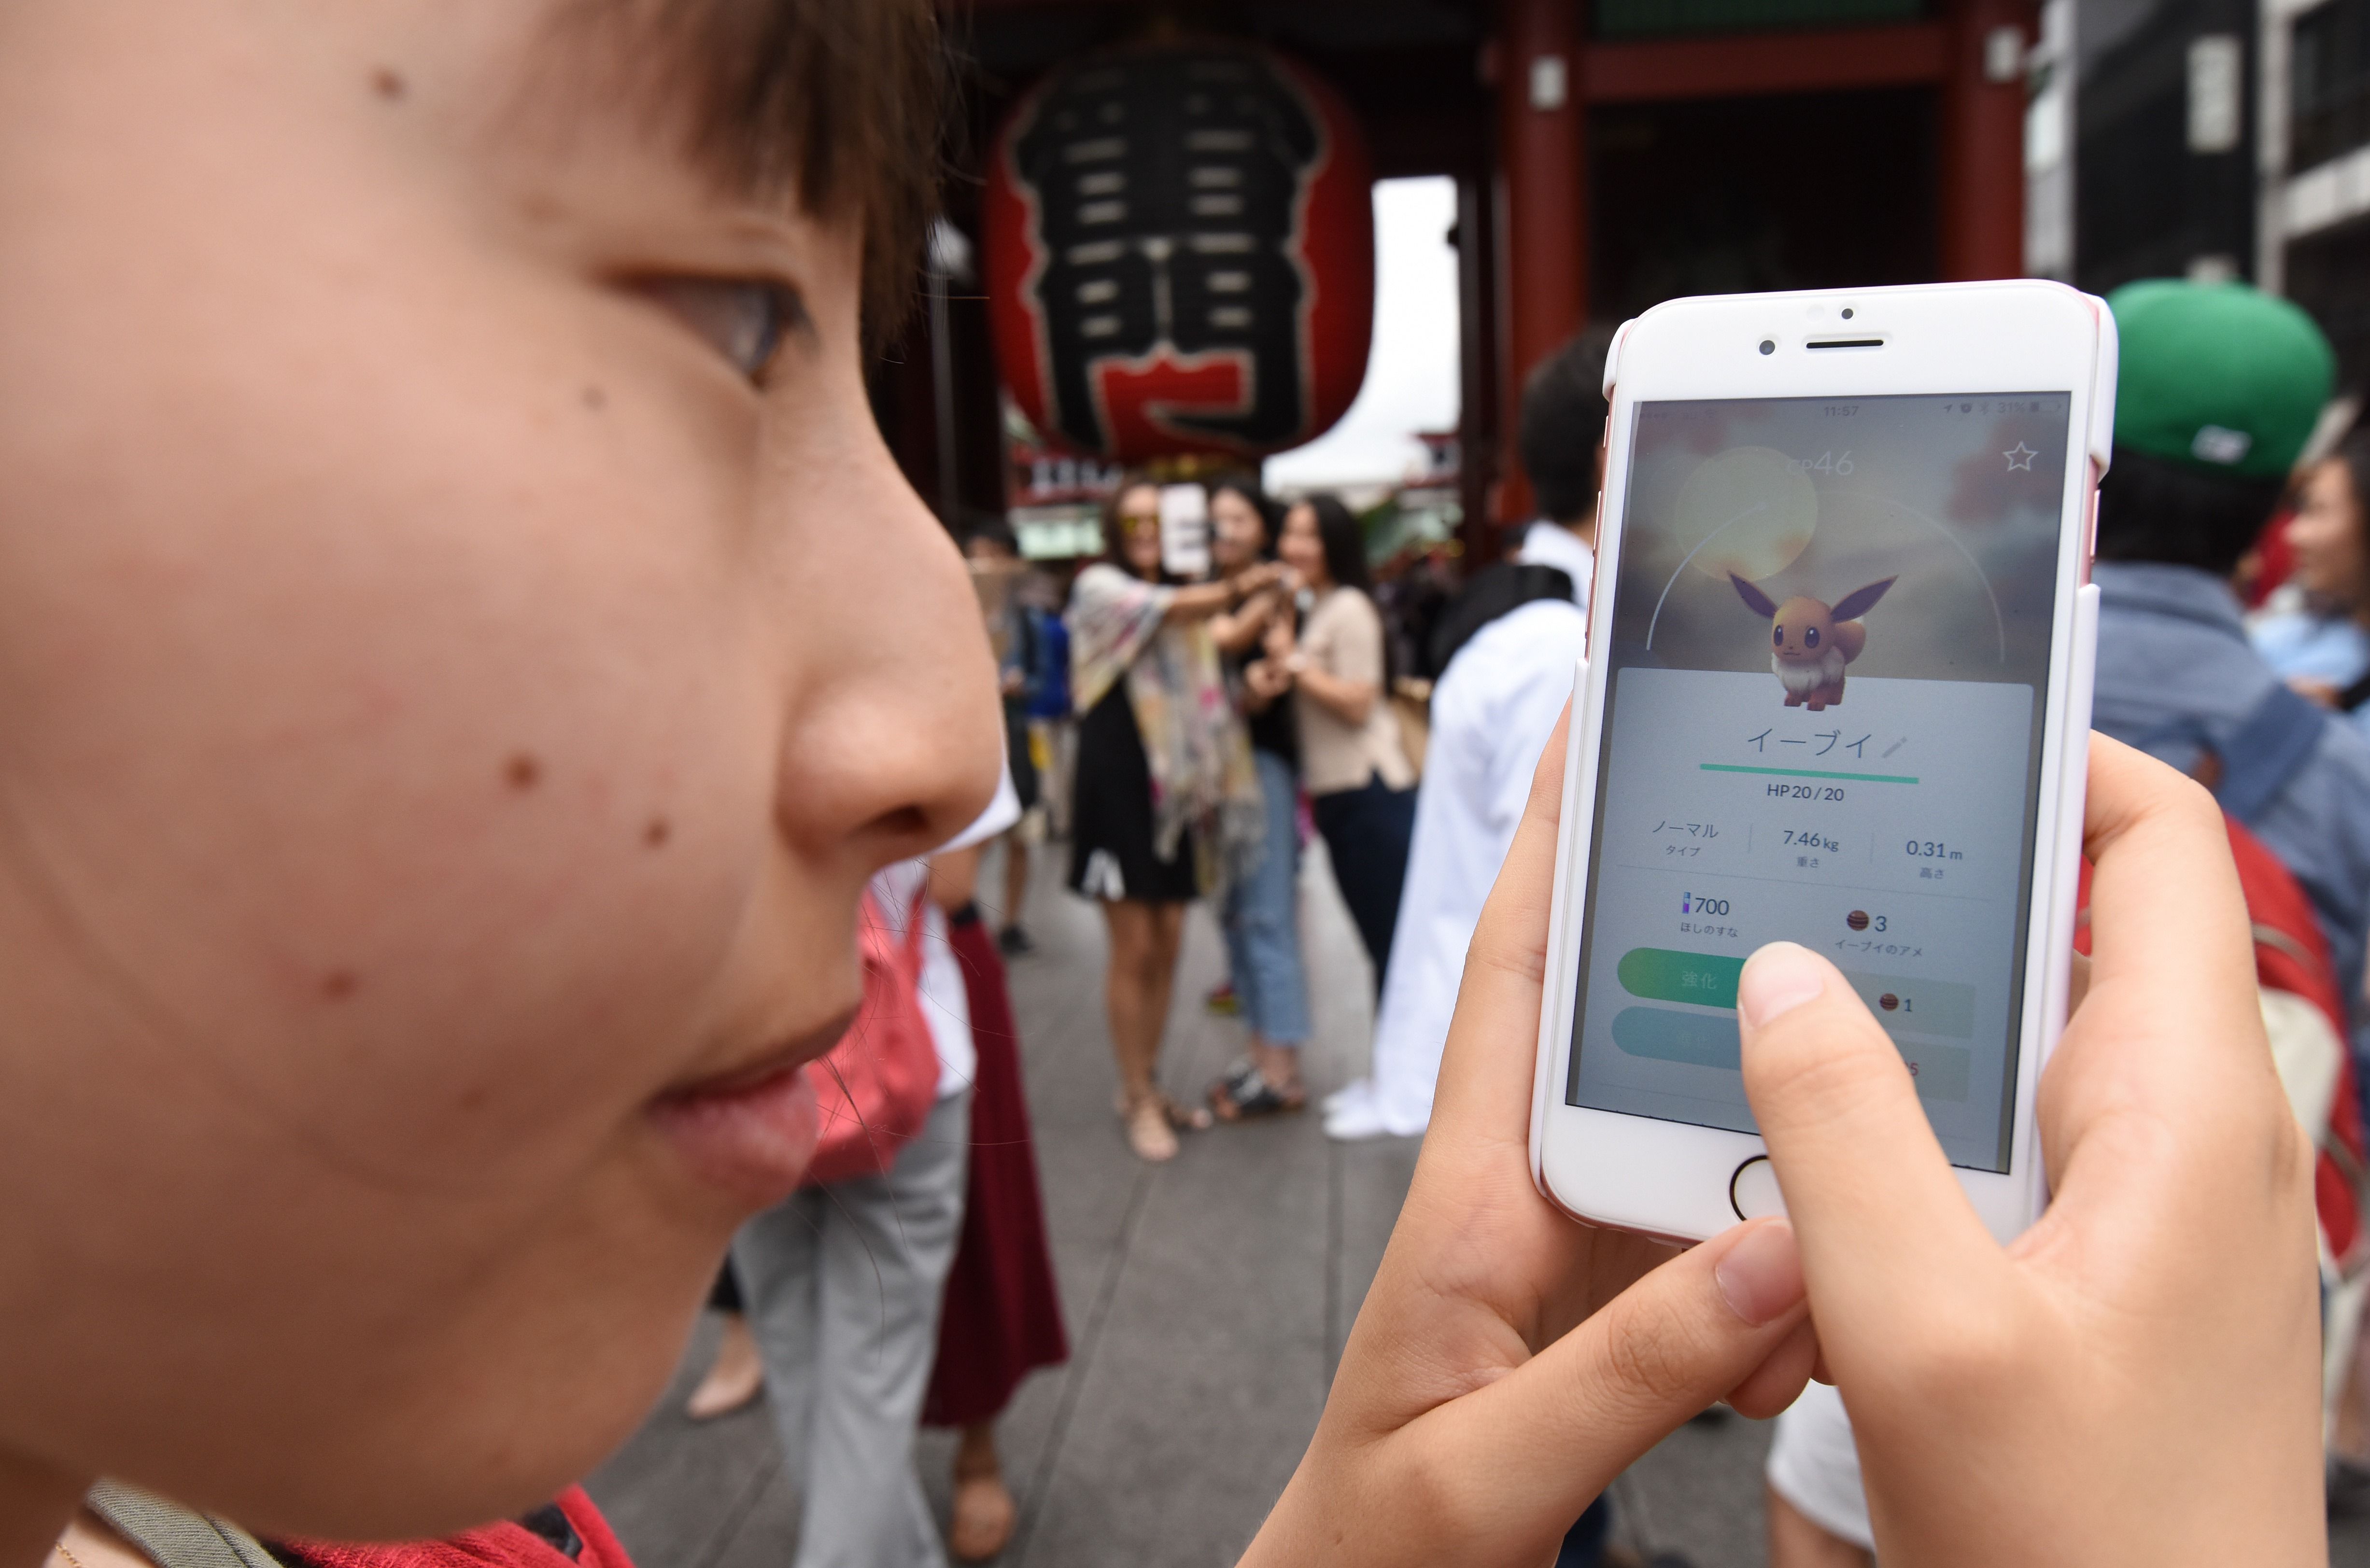 NPA figures on Tuesday showed that there were 79 bicycle and car accidents linked to playing 'Pokemon Go' since the game's release in the country on July 22. | AFP-JIJI